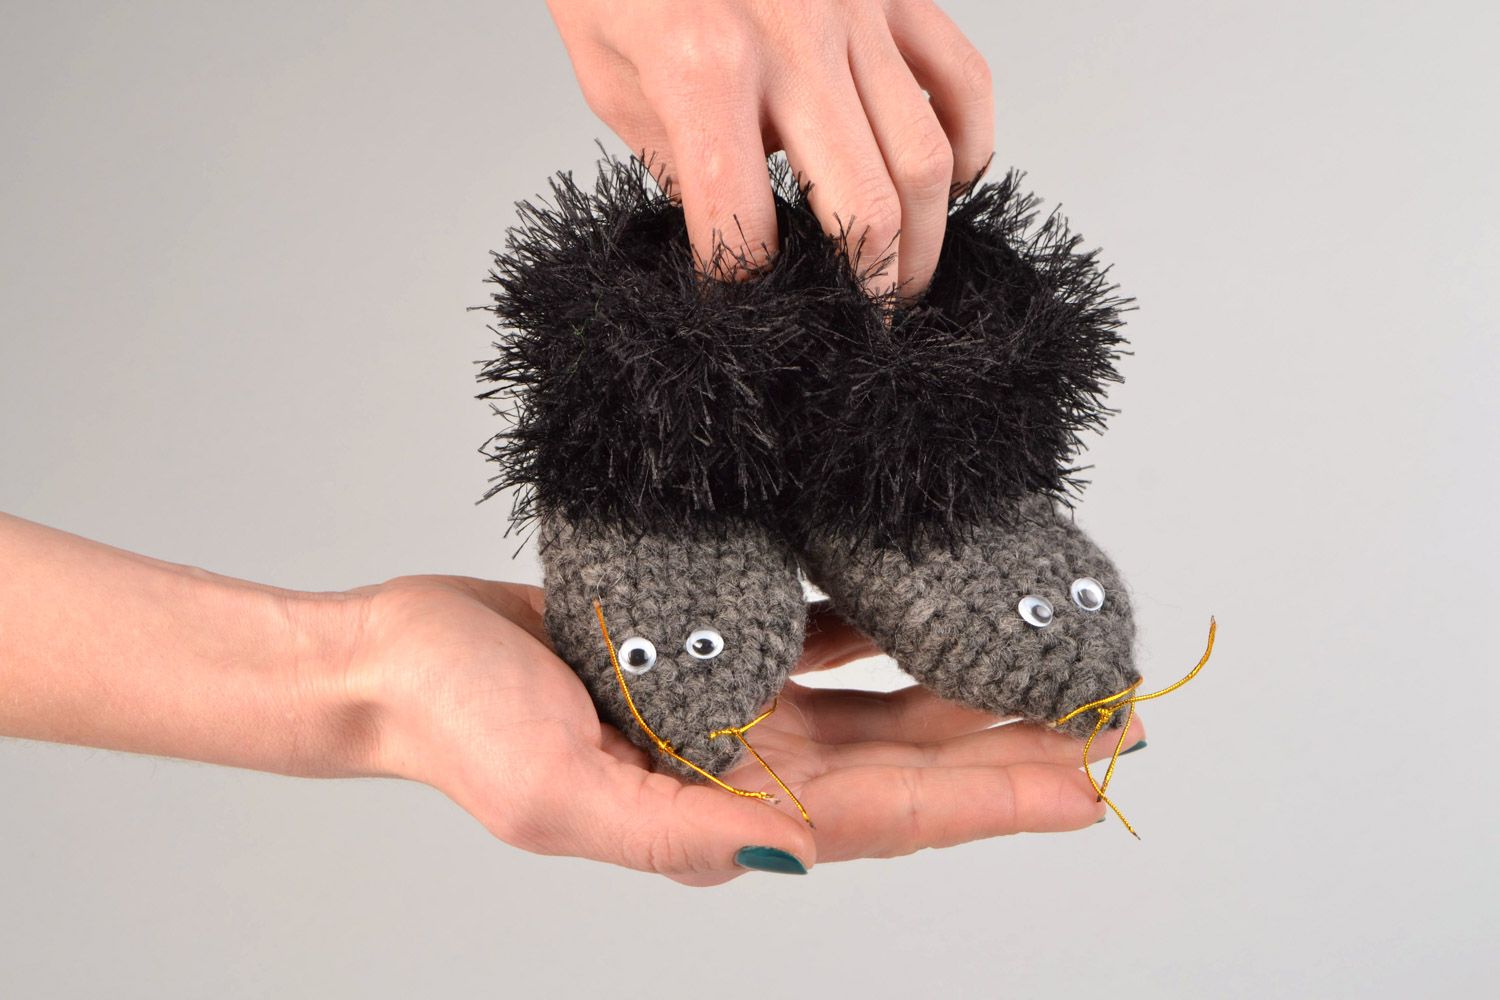 Handmade crochet baby shoes in the shape of gray hedgehogs with black edges photo 2